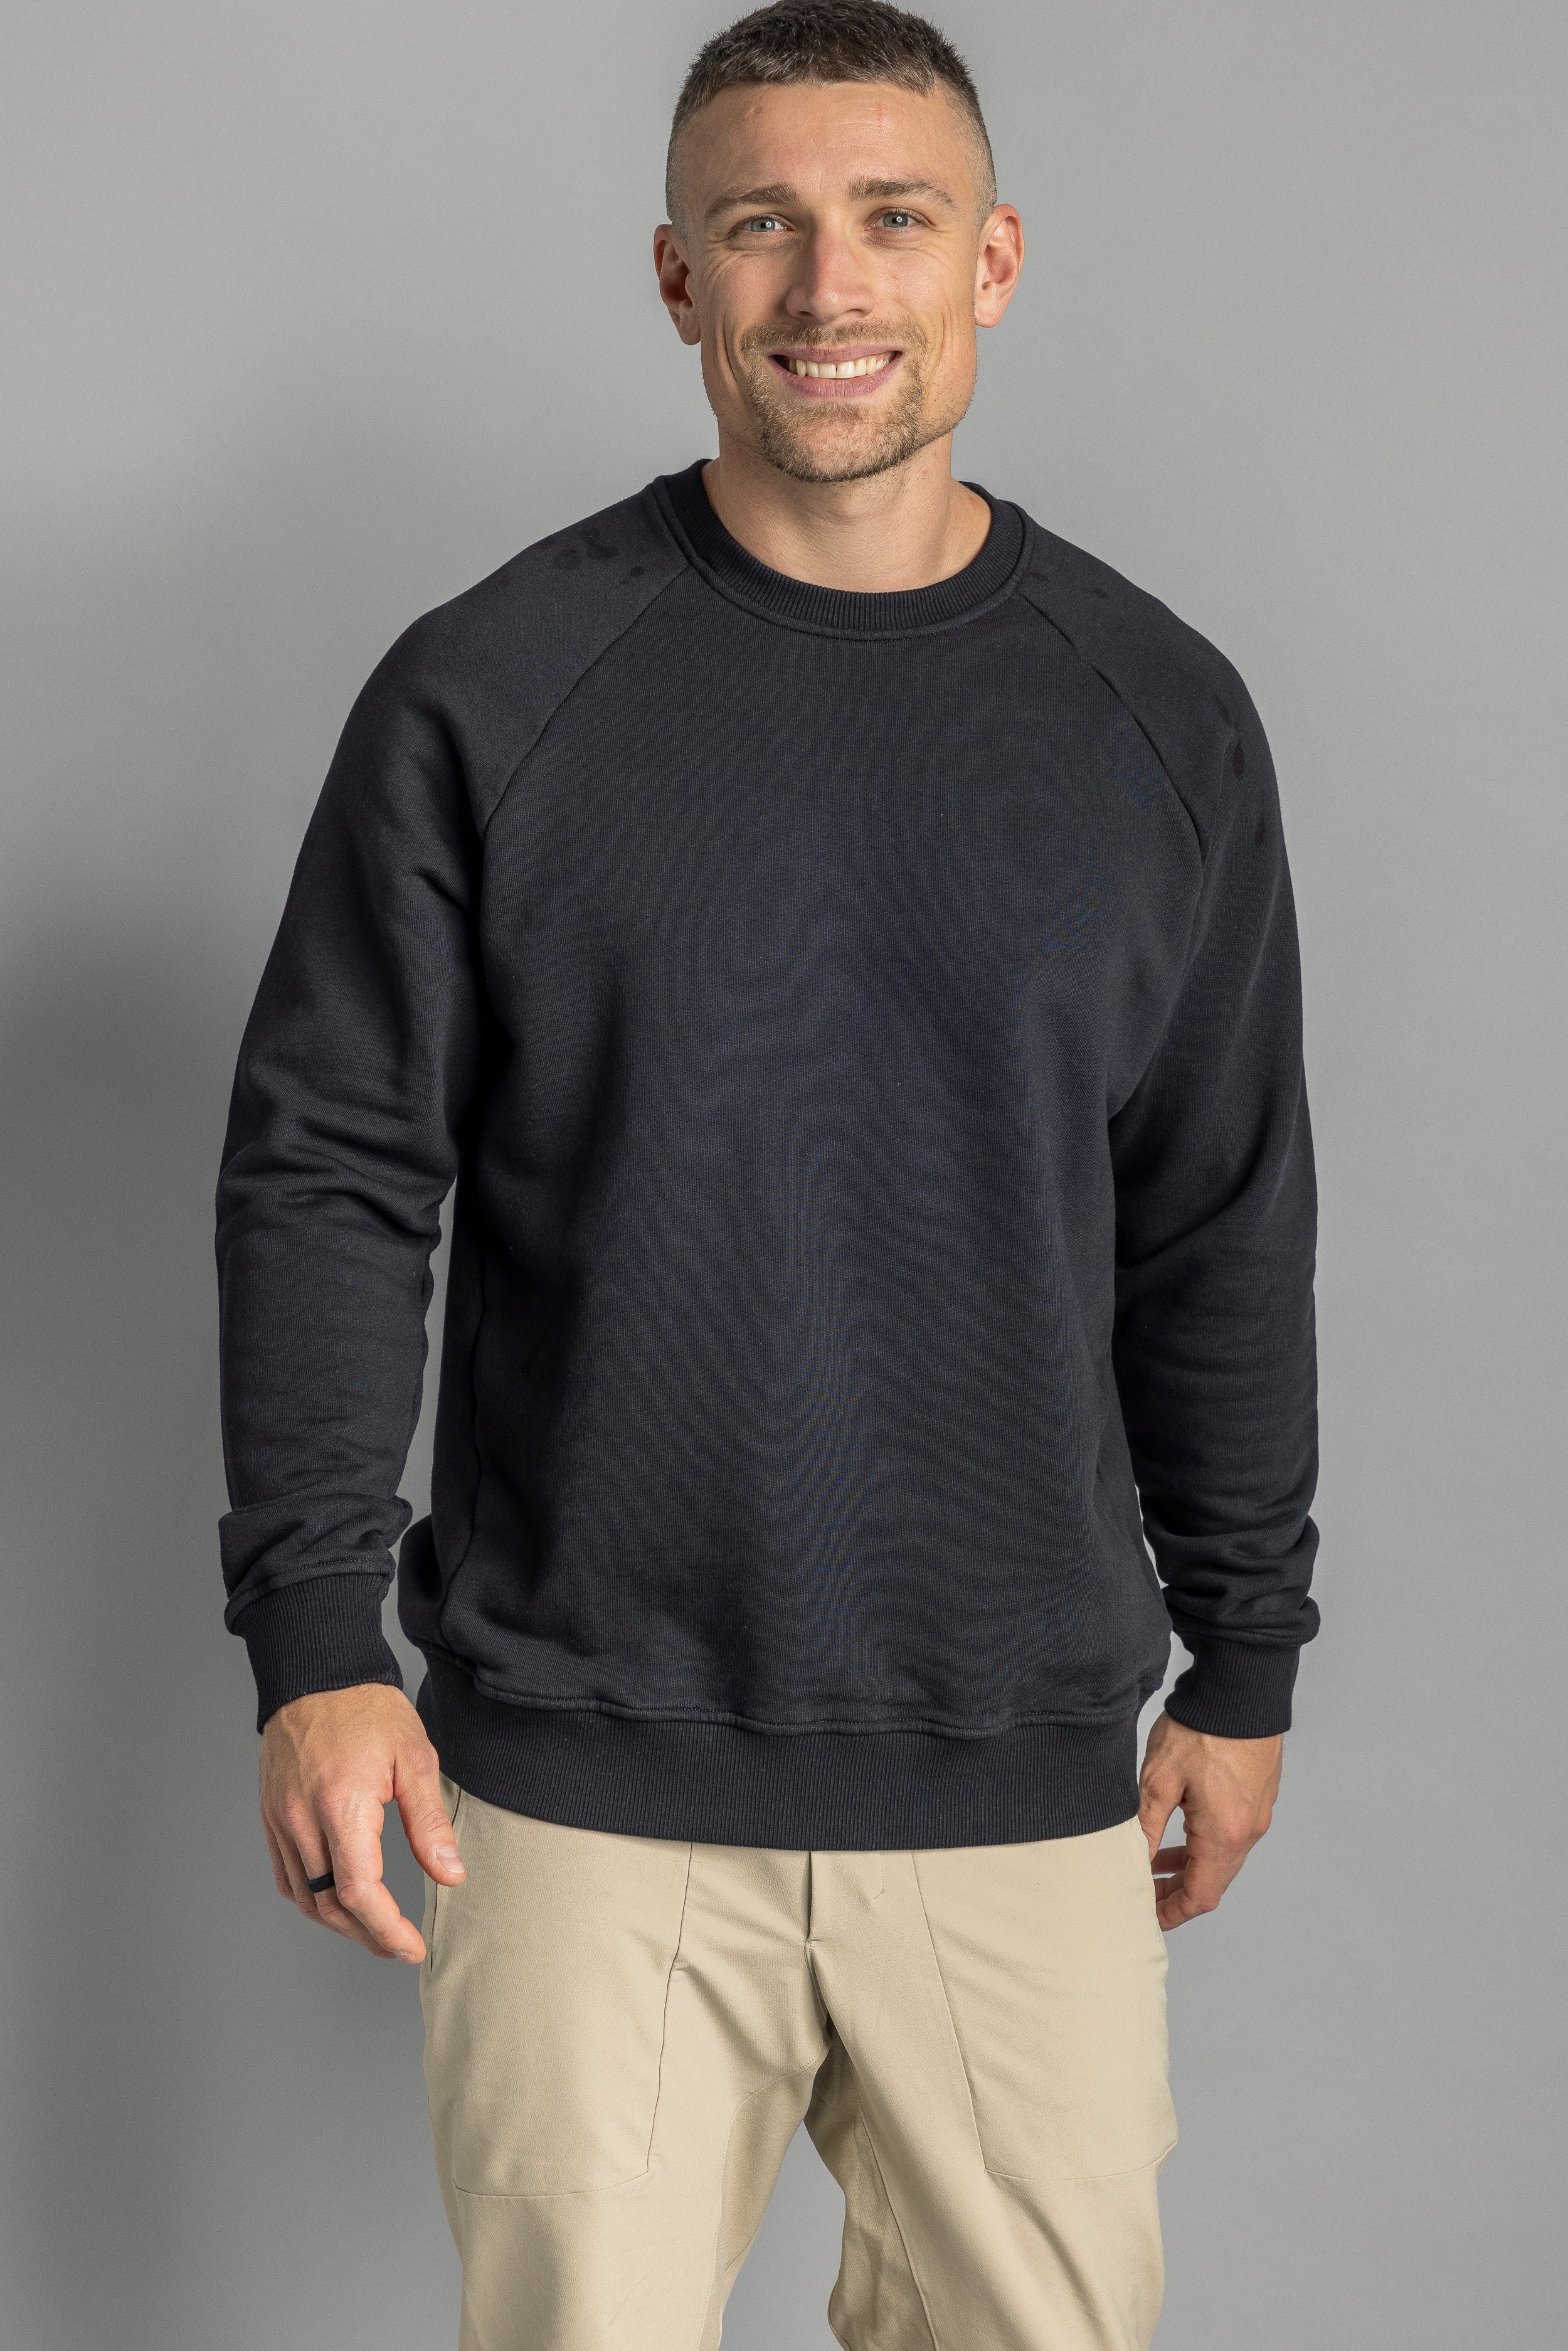 Black sweater raglan made from 100% organic cotton from DIRTS